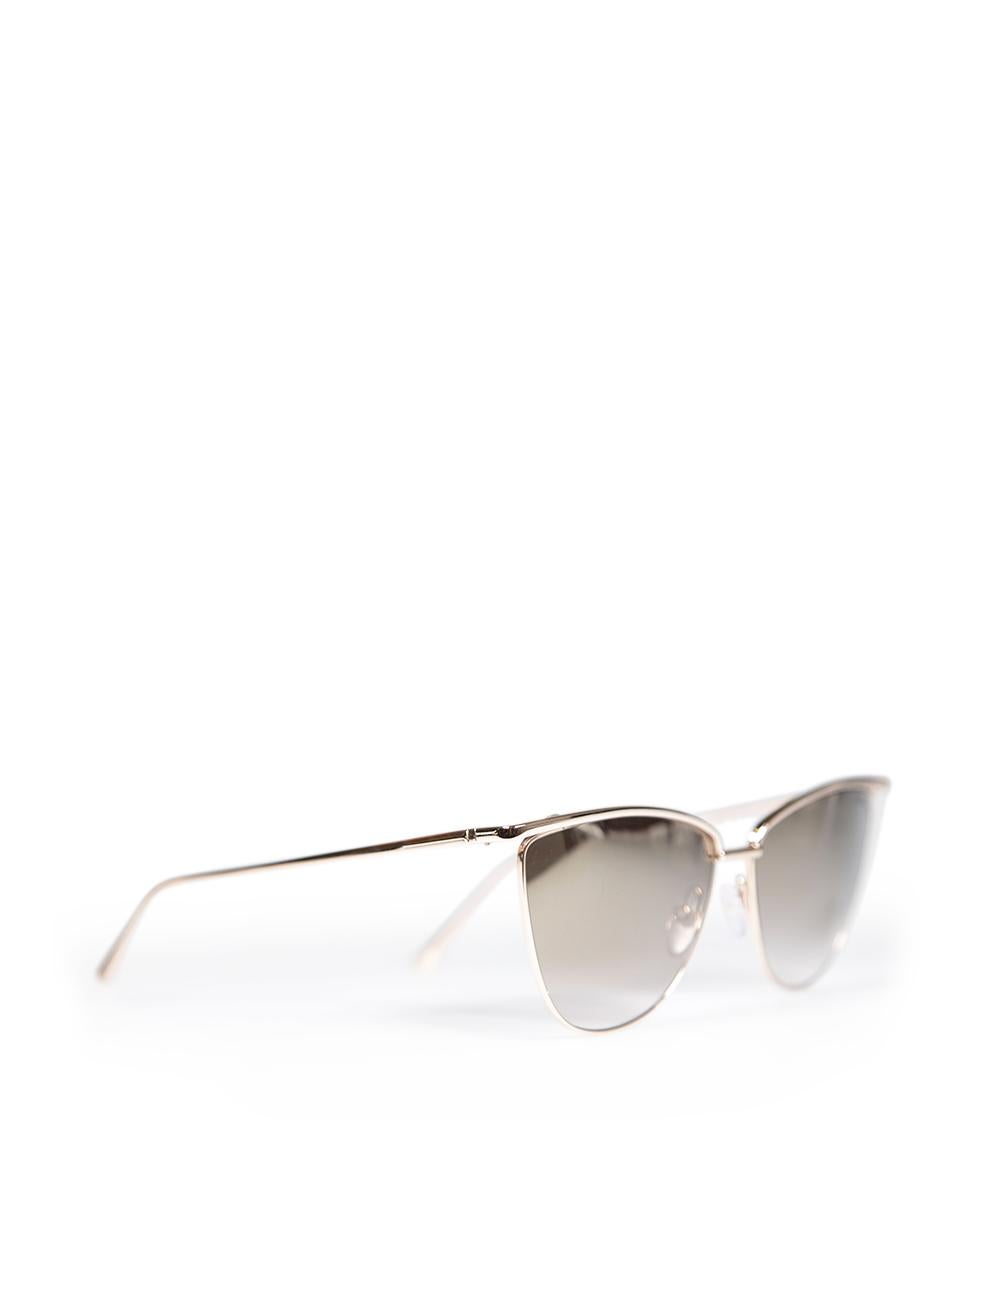 Tom Ford Shiny Rose Gold Veronica Sunglasses In New Condition For Sale In London, GB